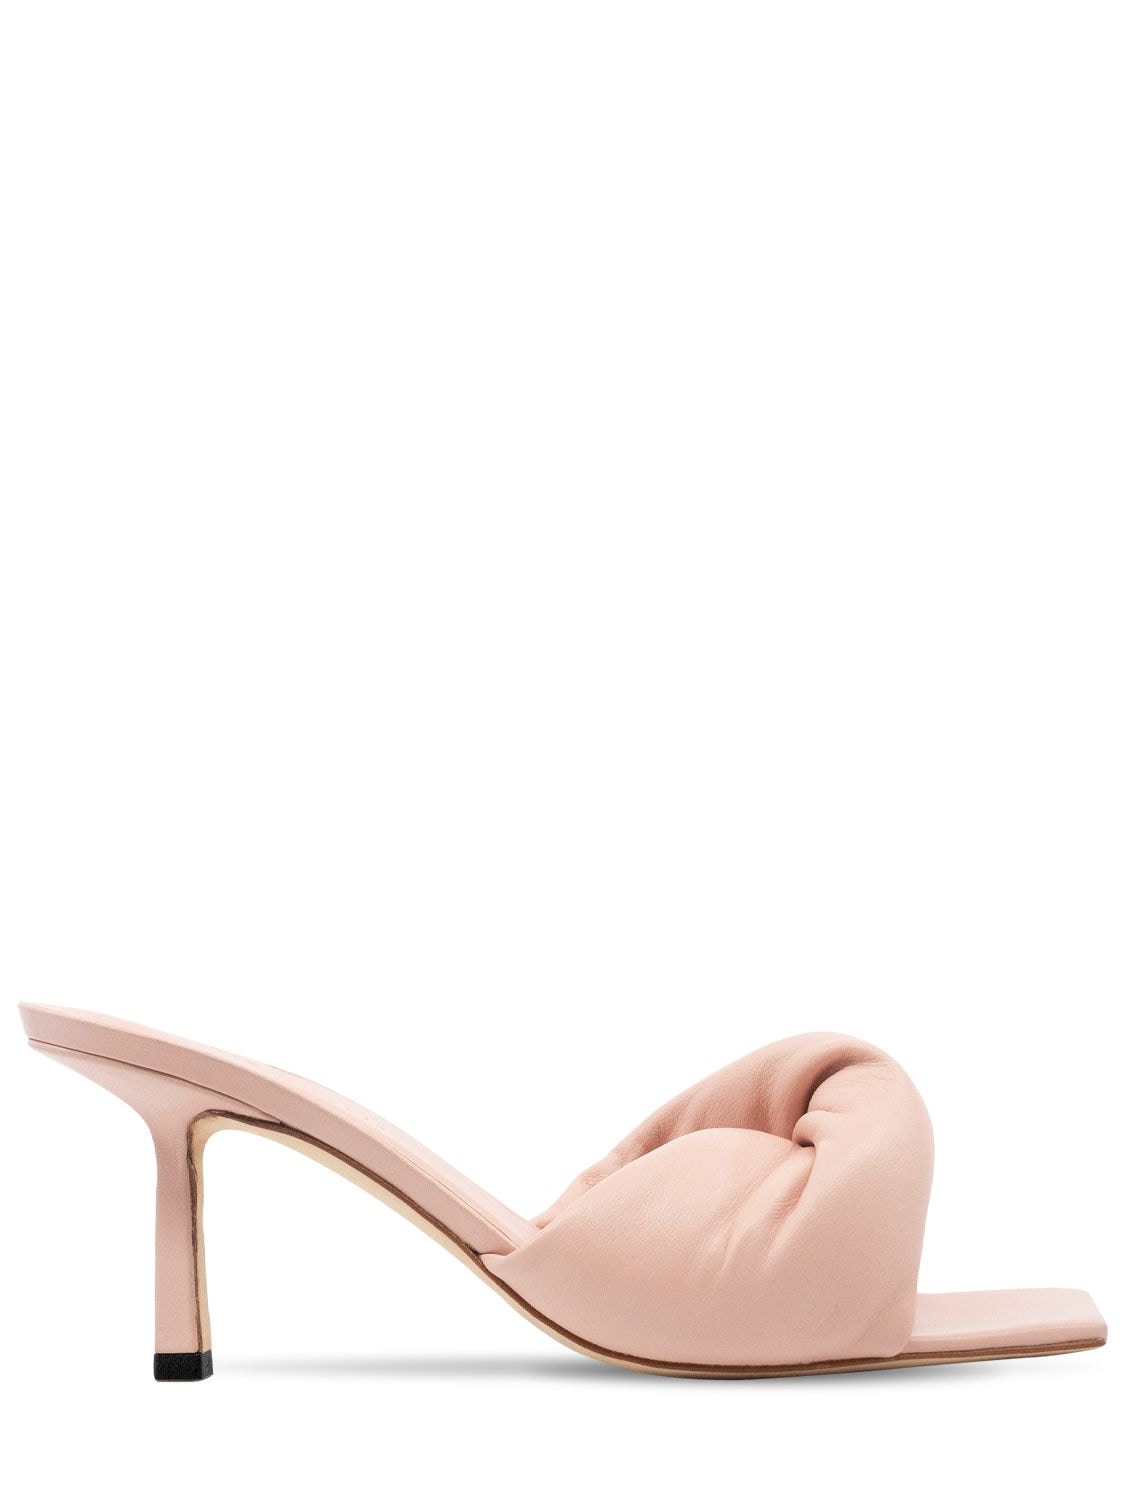 Studio Amelia 75mm Twist Padded Leather Mules In Rose Pink